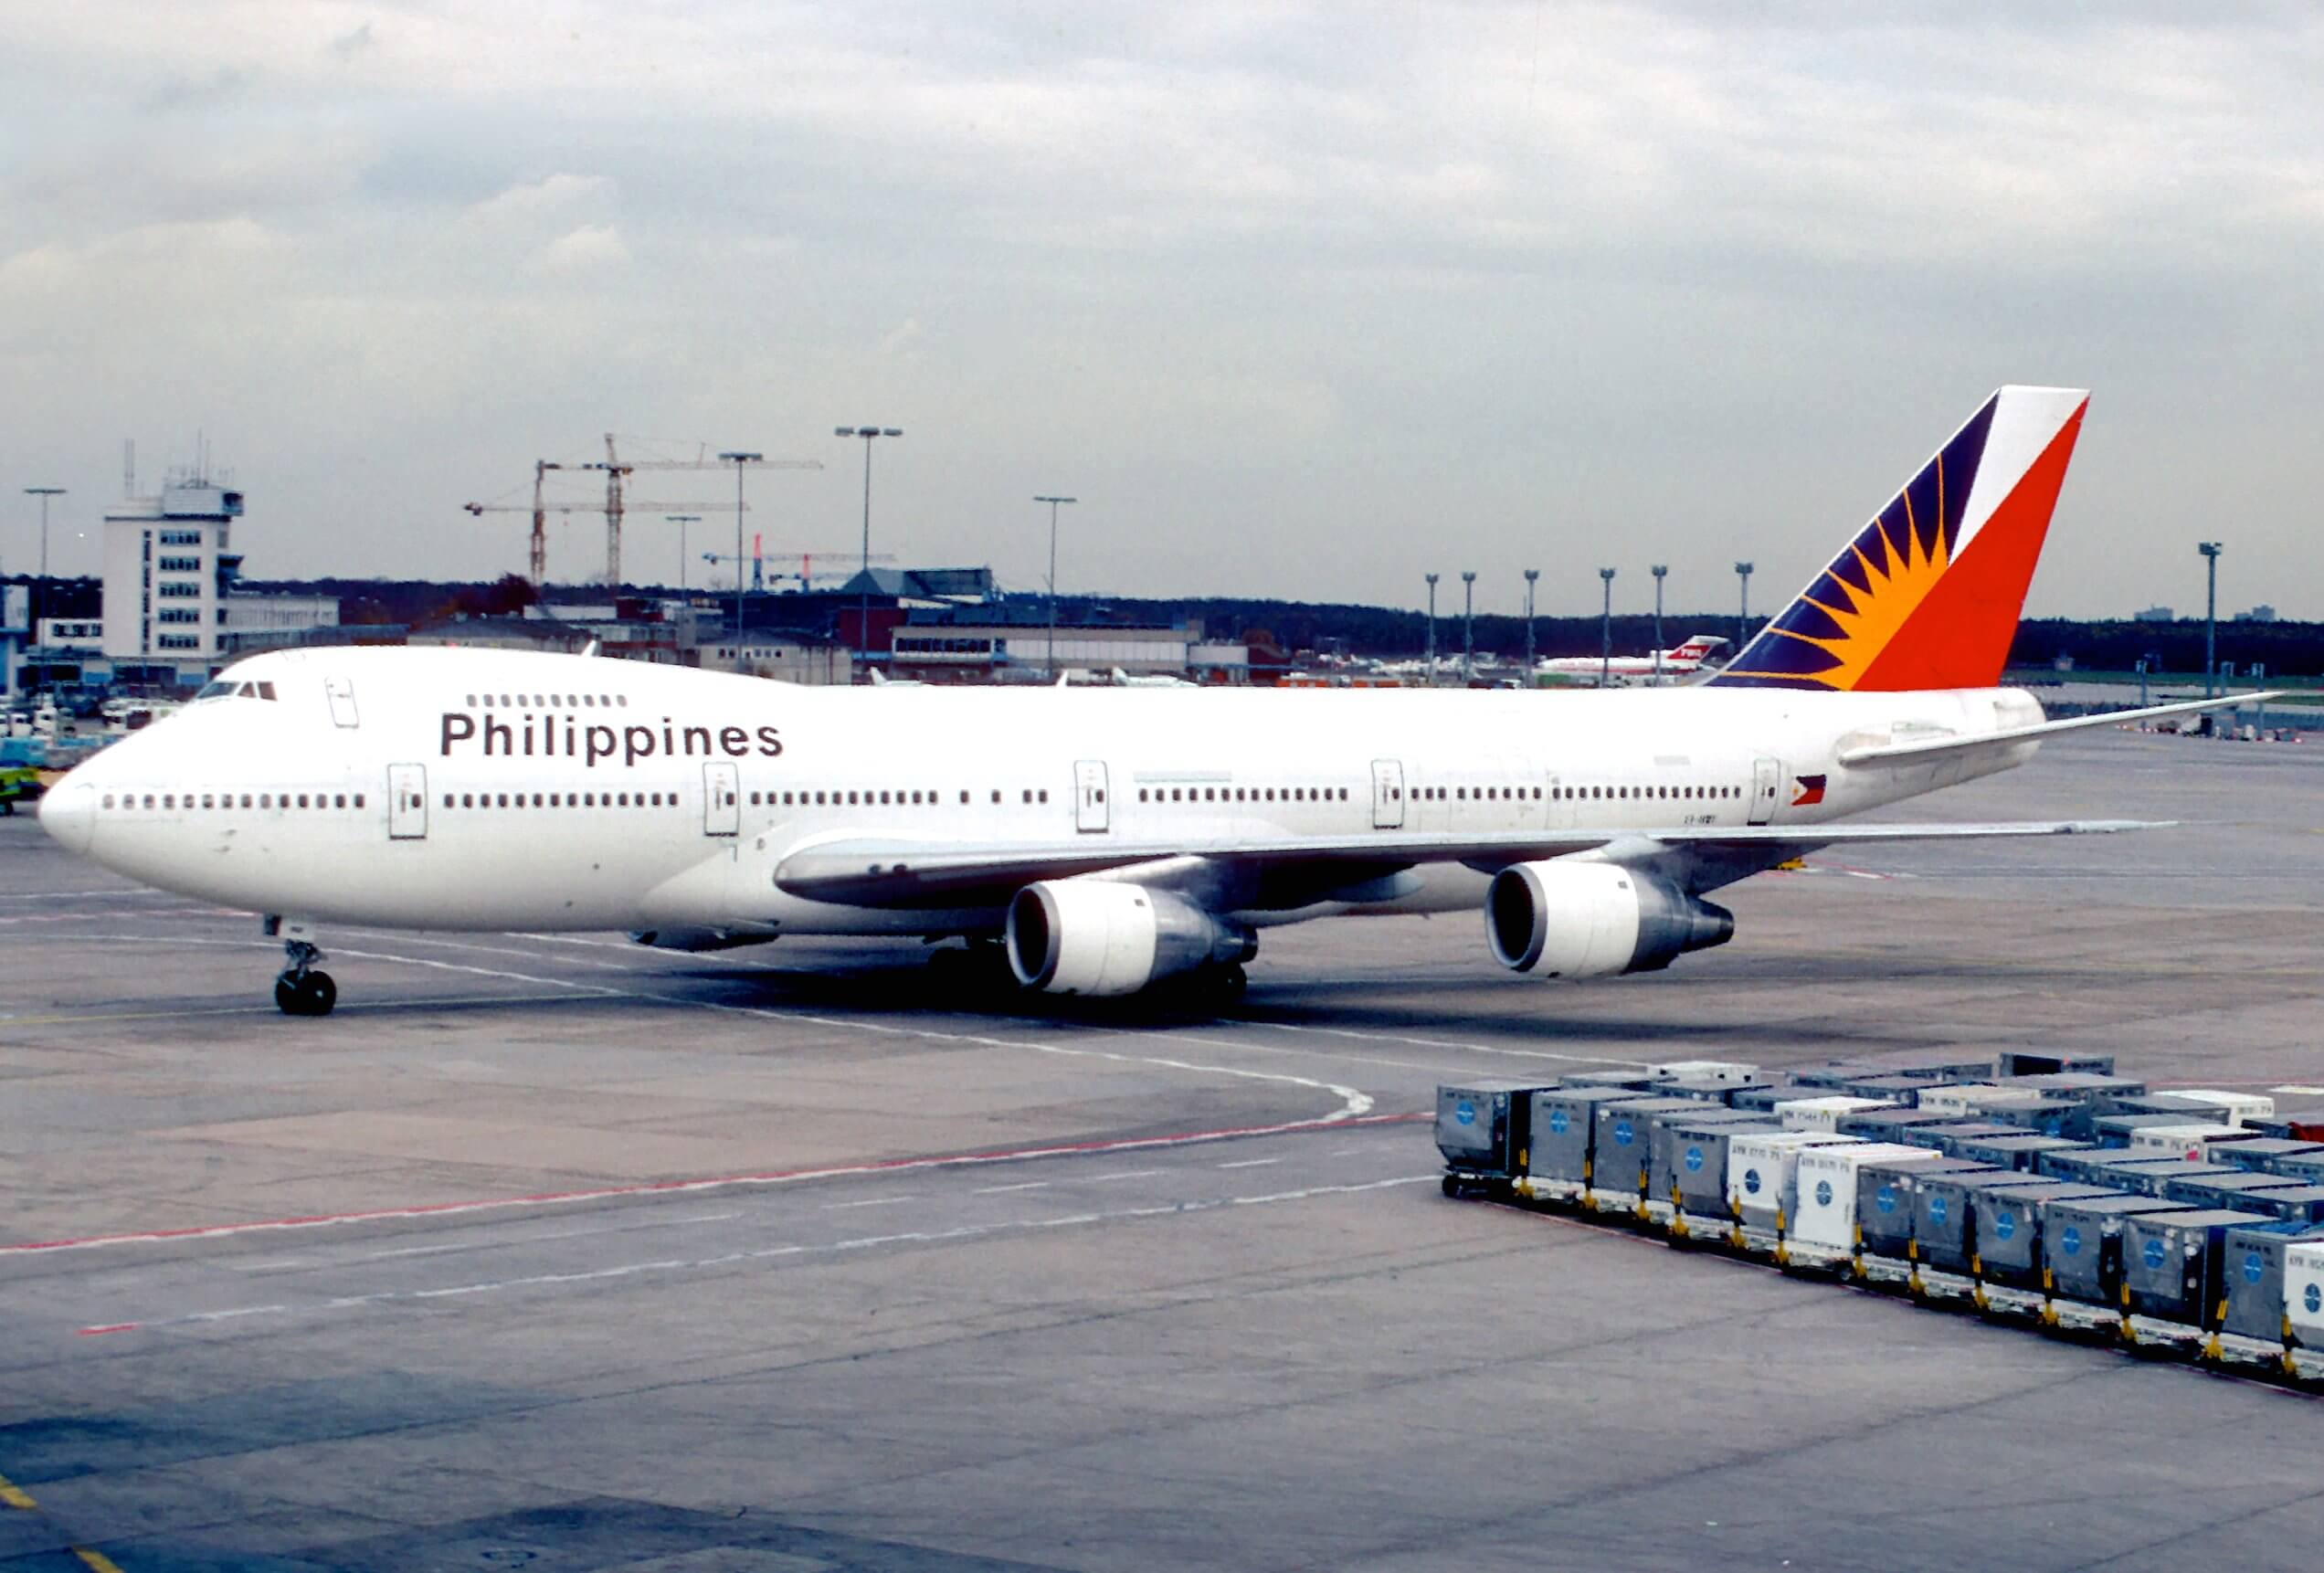 Philippine Airlines to add more to its USA to Philippines flights. The